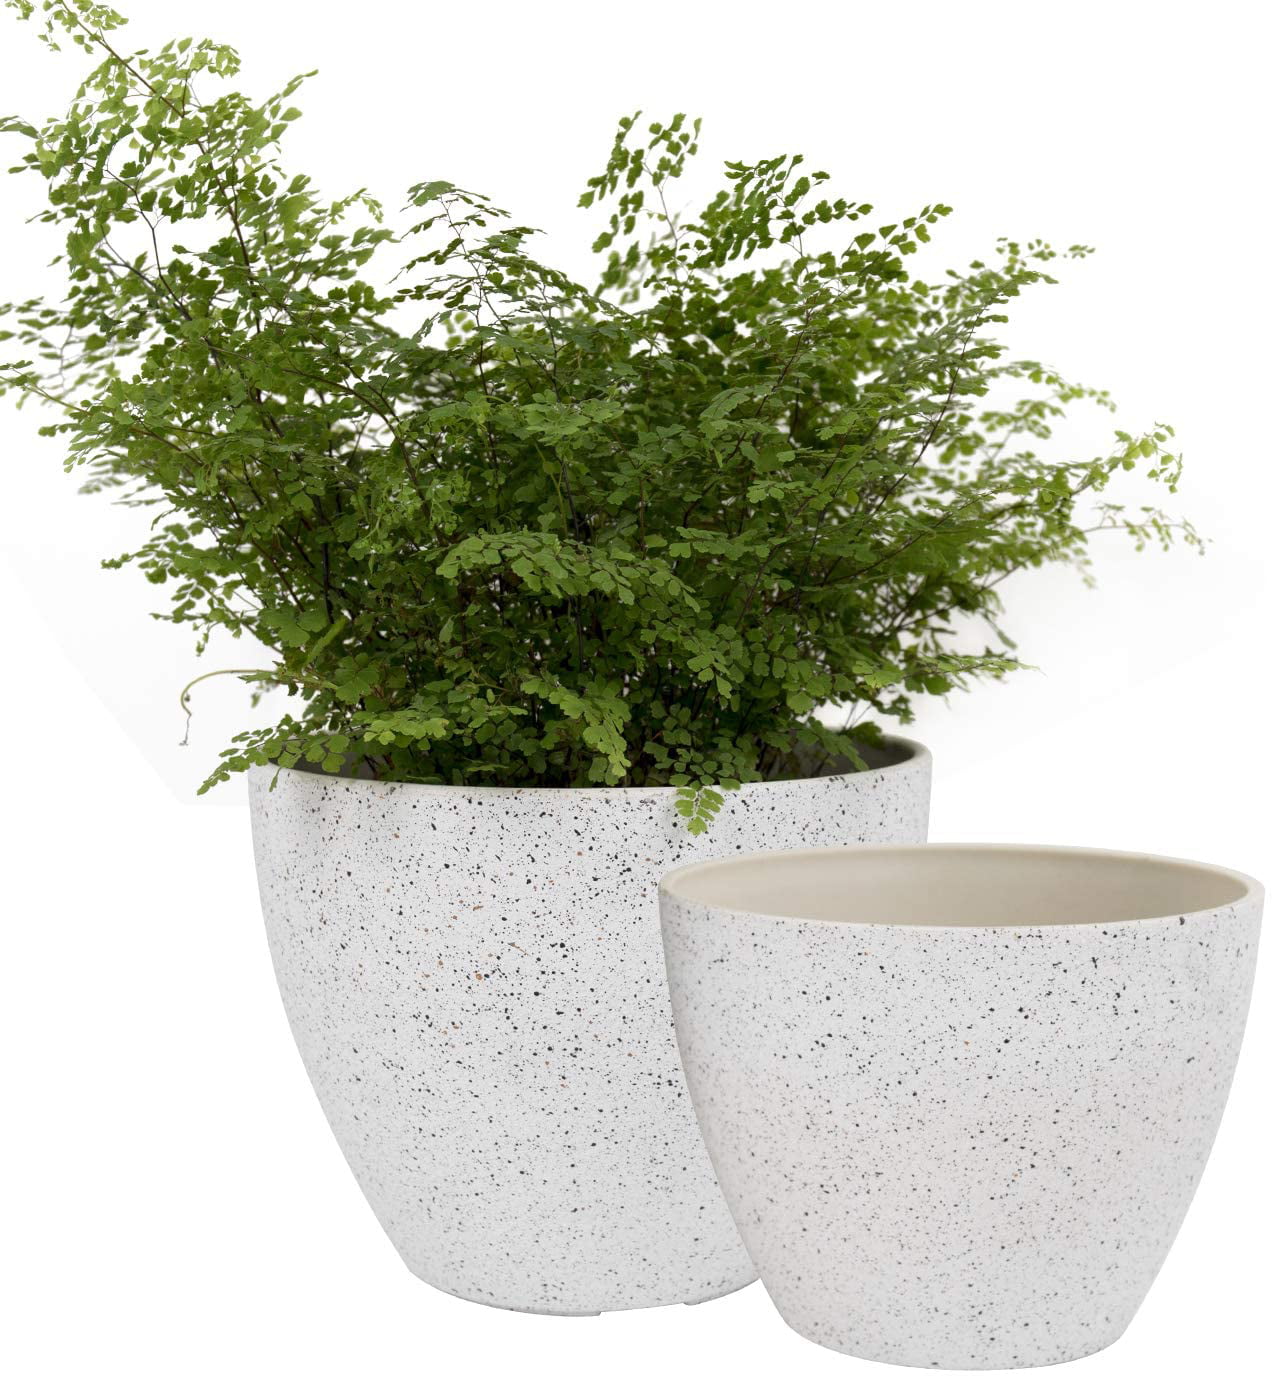 Flower Pots Outdoor Garden Planters, Large Outdoor Plant Pots With Drainage Holes